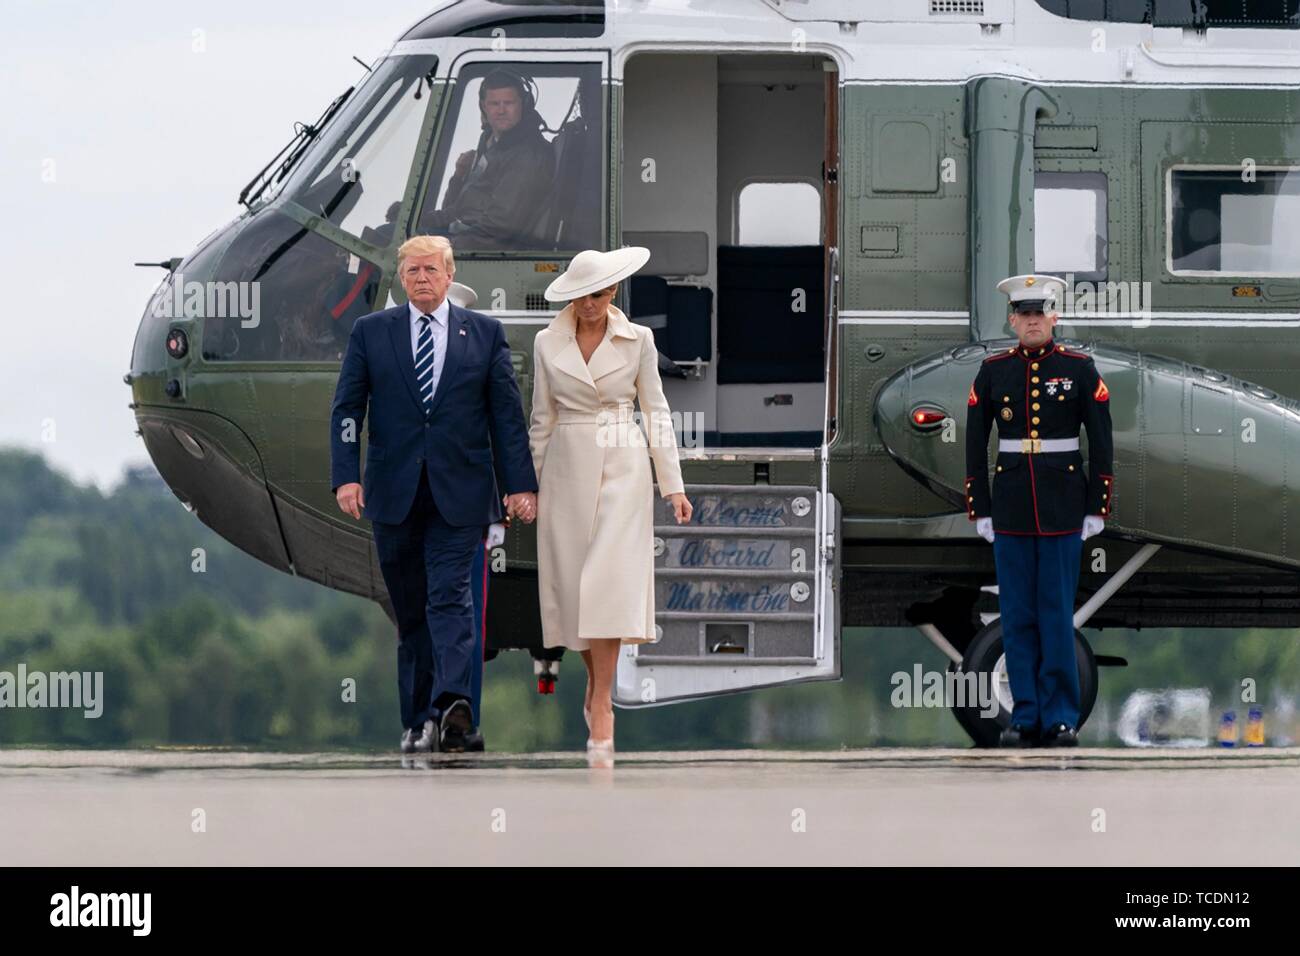 U.S President Donald Trump and First Lady Melania Trump walk to Air Force One after landing aboard Marine One at Southampton Airport June 5, 2019 in Southhampton, England. The first couple are departing to spend the night at the presidents golf resort in Doonbeg, Ireland. Stock Photo